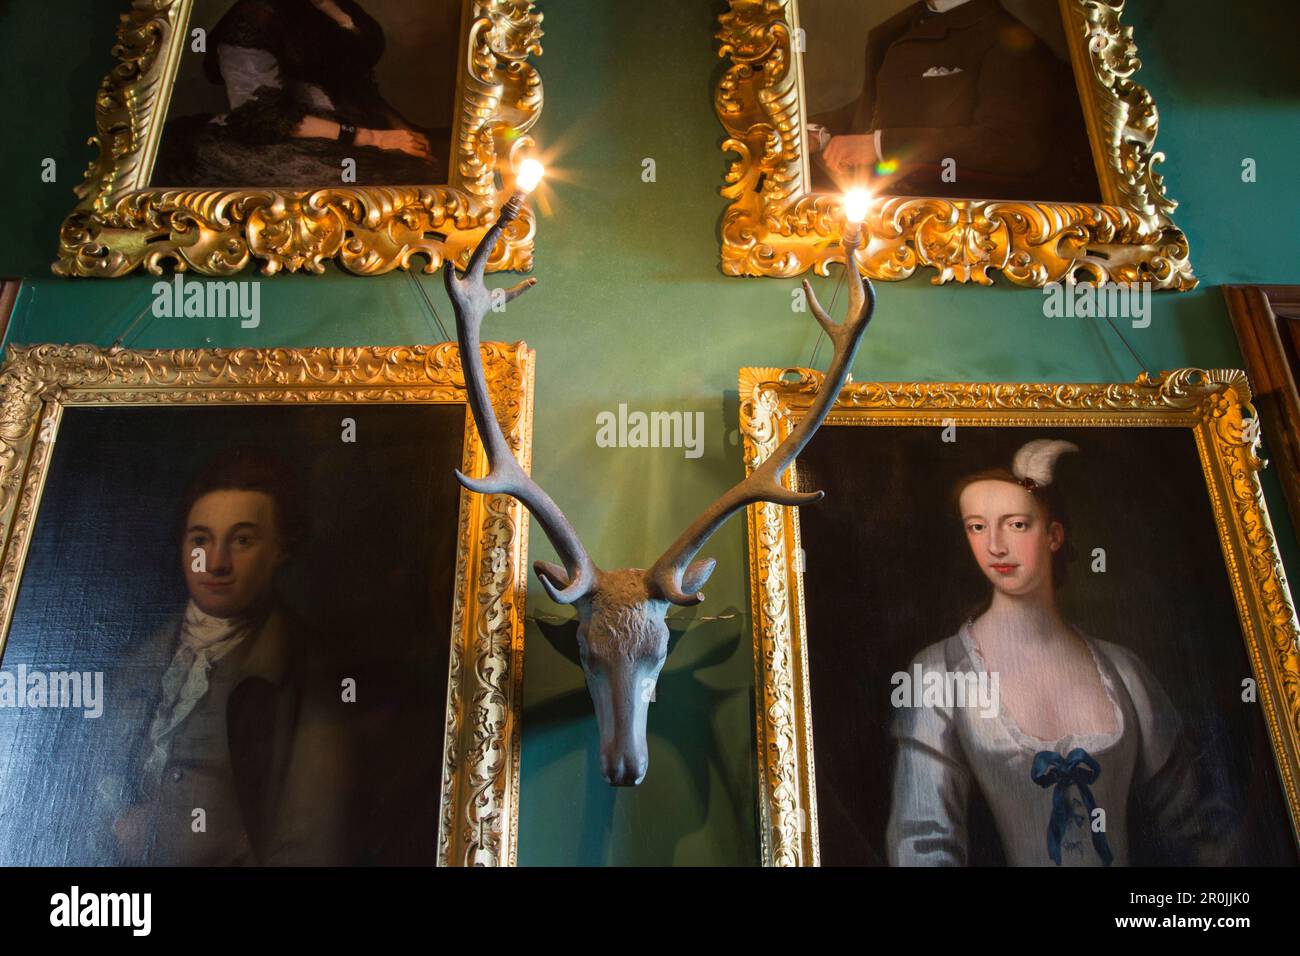 Stag lamp and paintings inside Balfour Castle country house hotel, Shapinsay Island, Orkney Islands, Scotland, United Kingdom Stock Photo